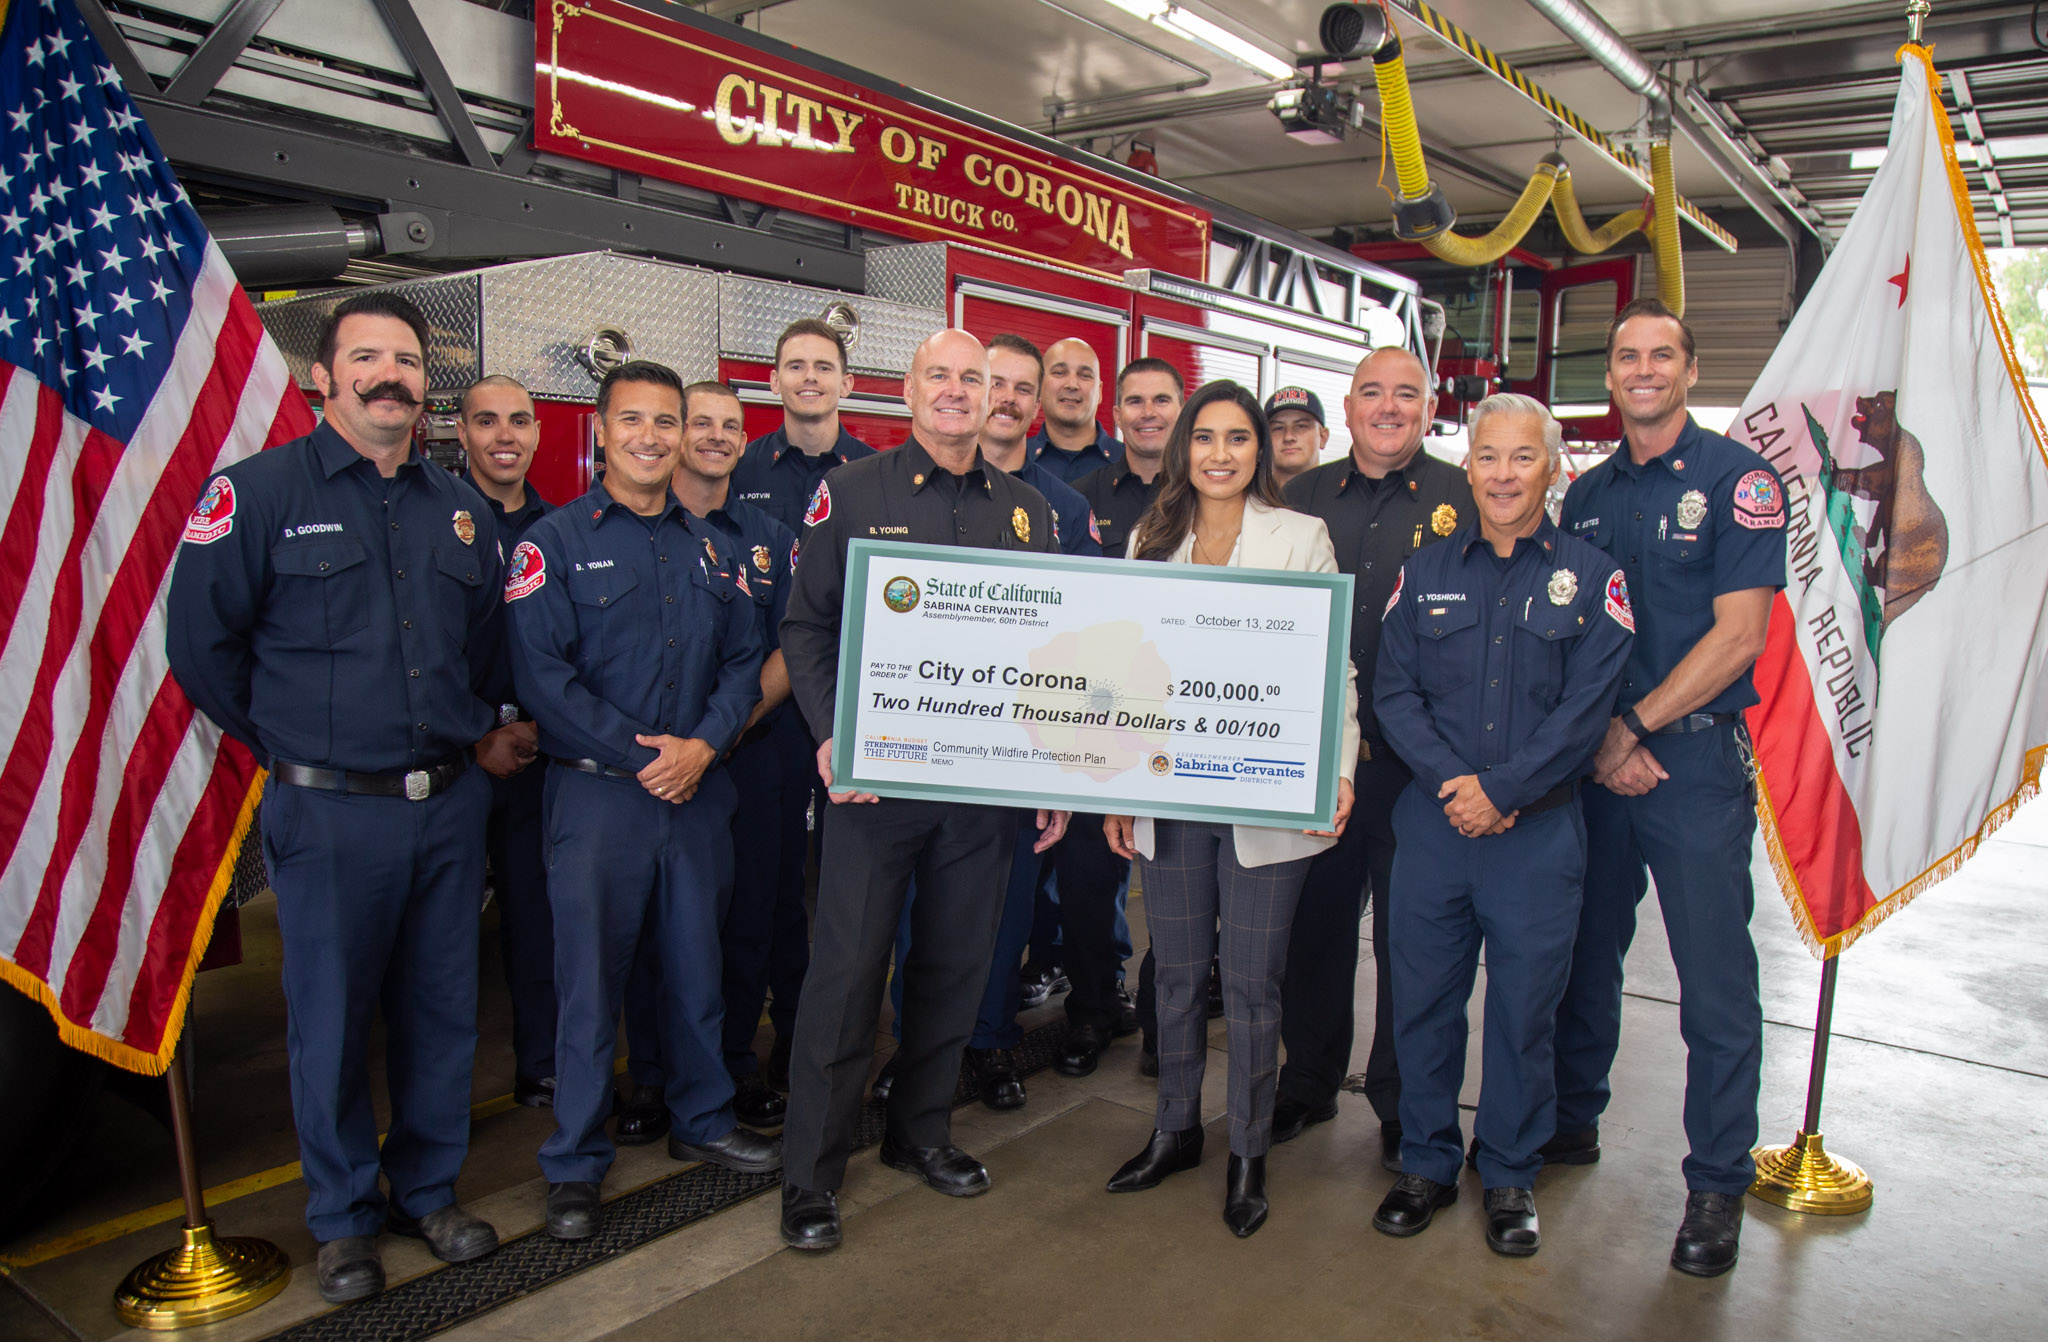 Assemblymember Sabrina Cervantes and City of Corona Firefighters and representatives holding a large oversized check of $200,000 for the City's Wildfire Safety Plan